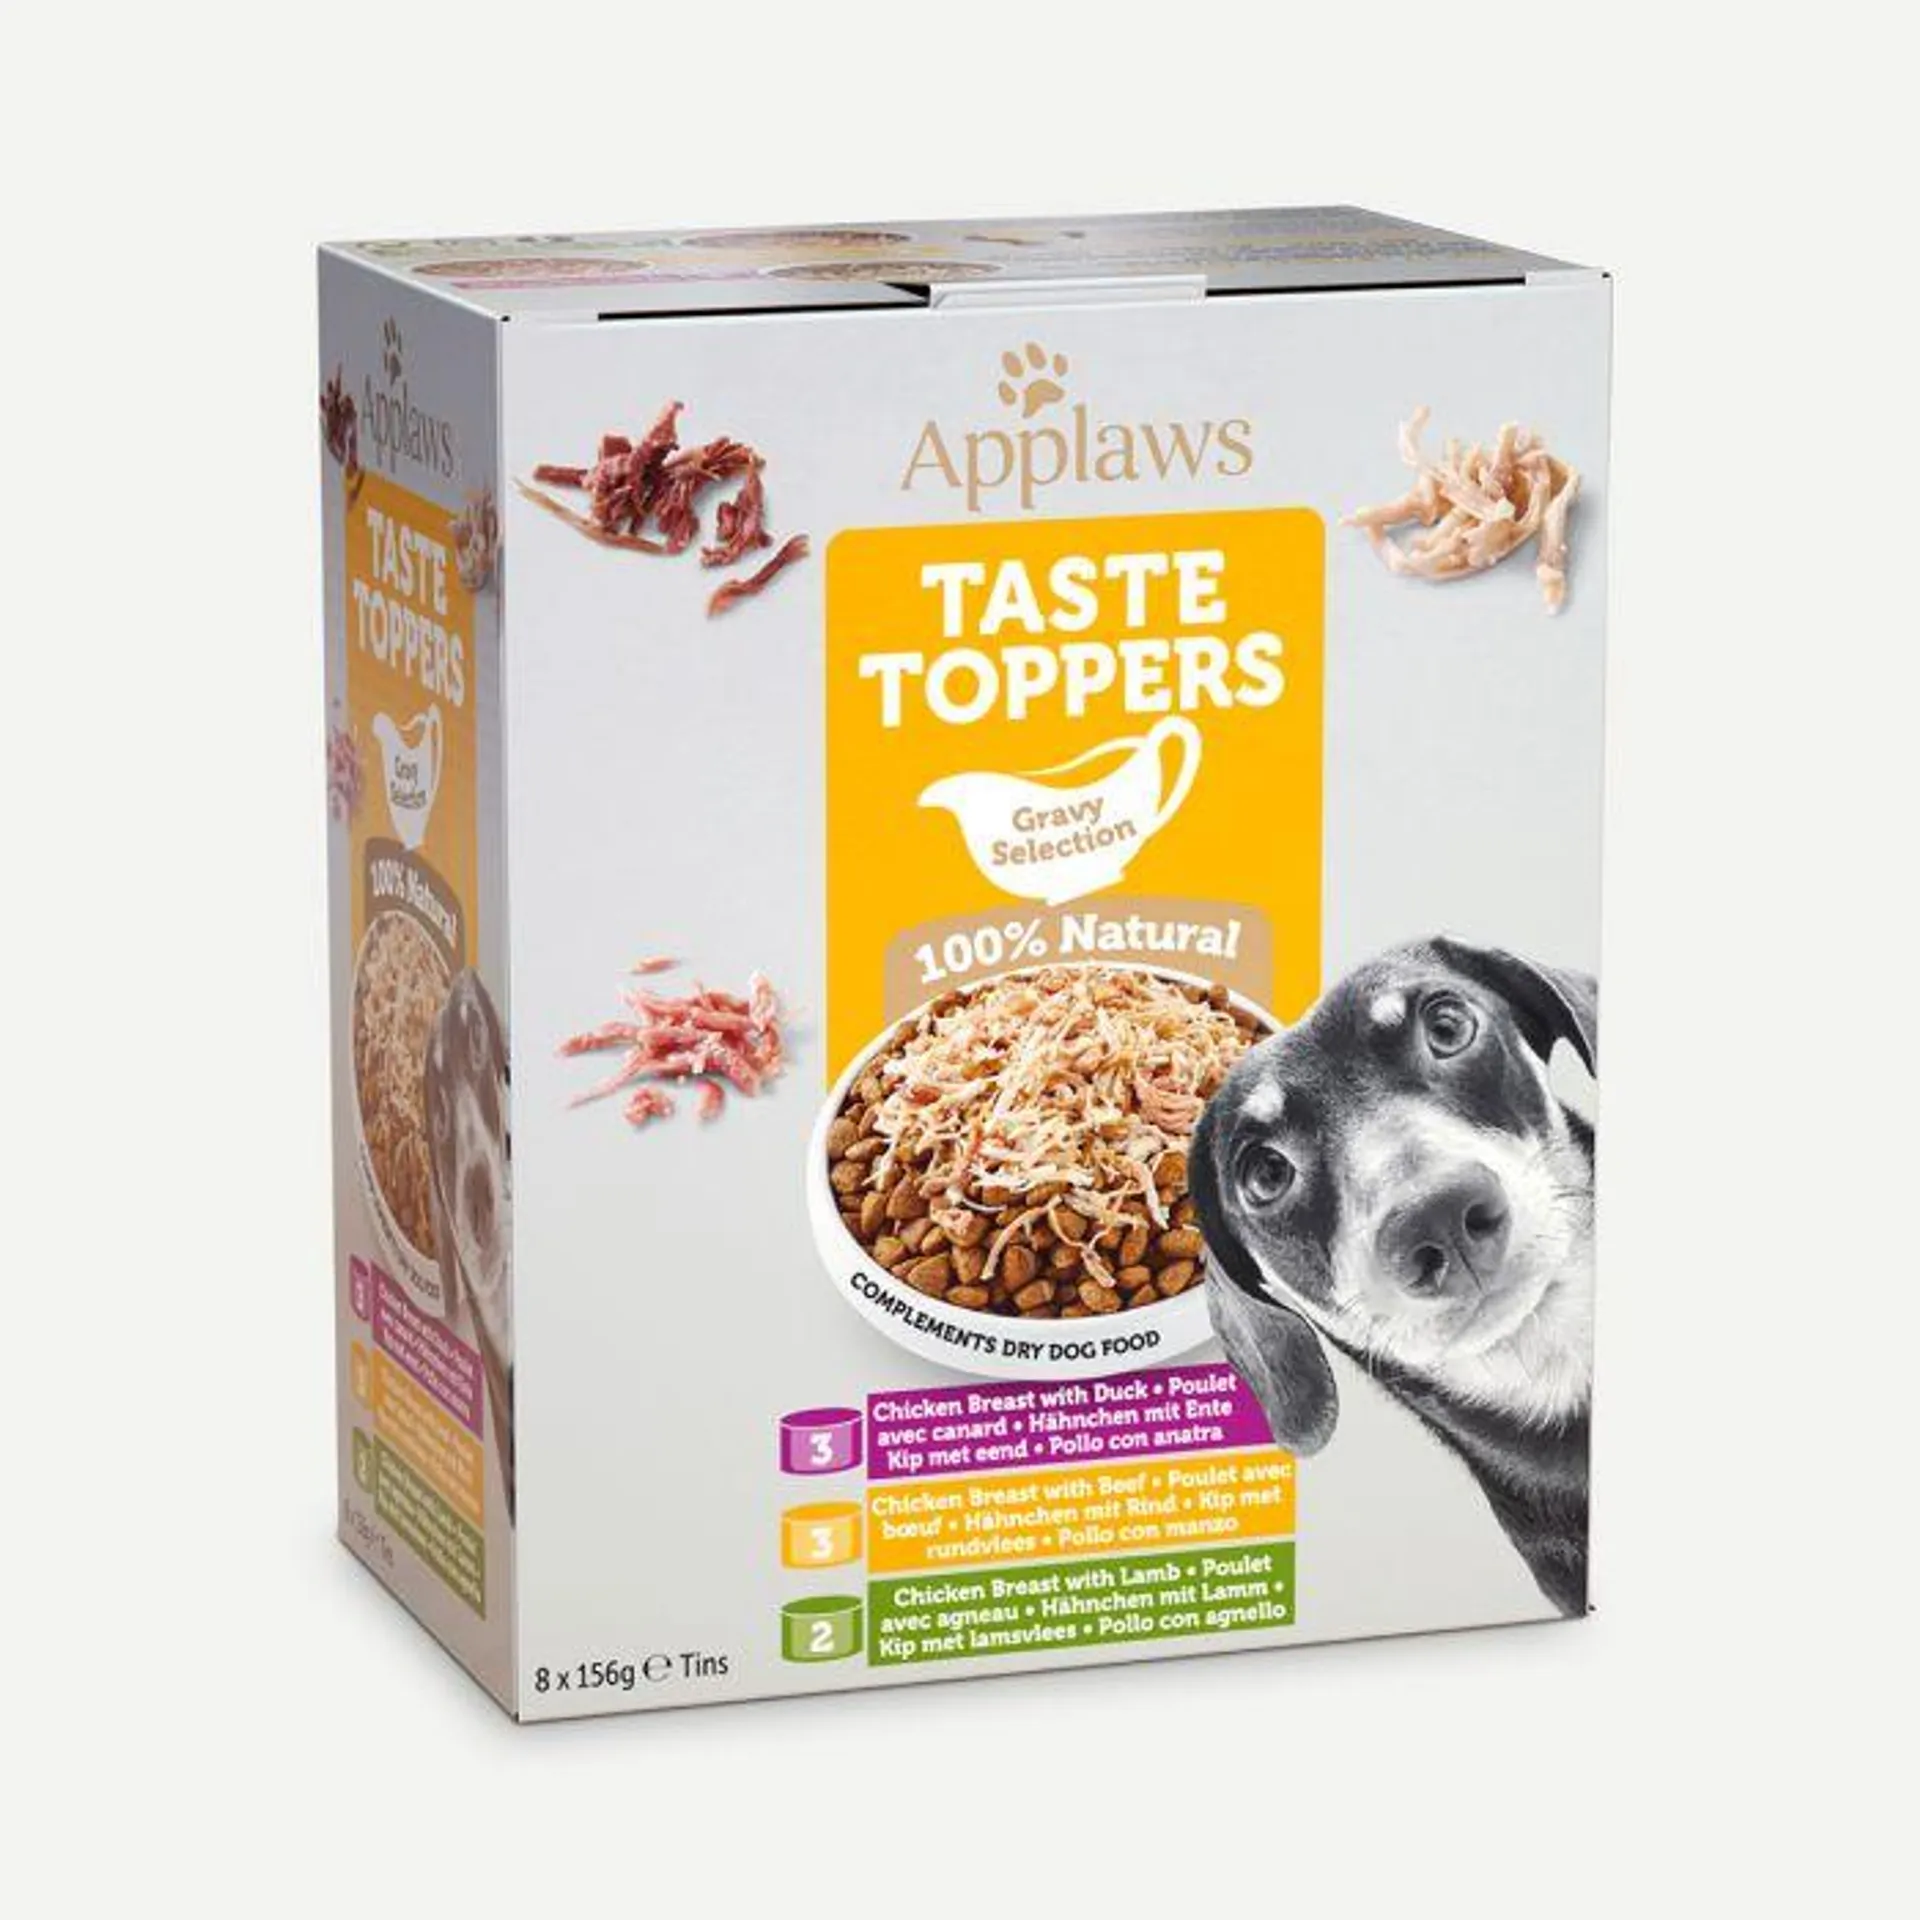 Applaws Taste Toppers Gravy Selection 8 X 156G Tins